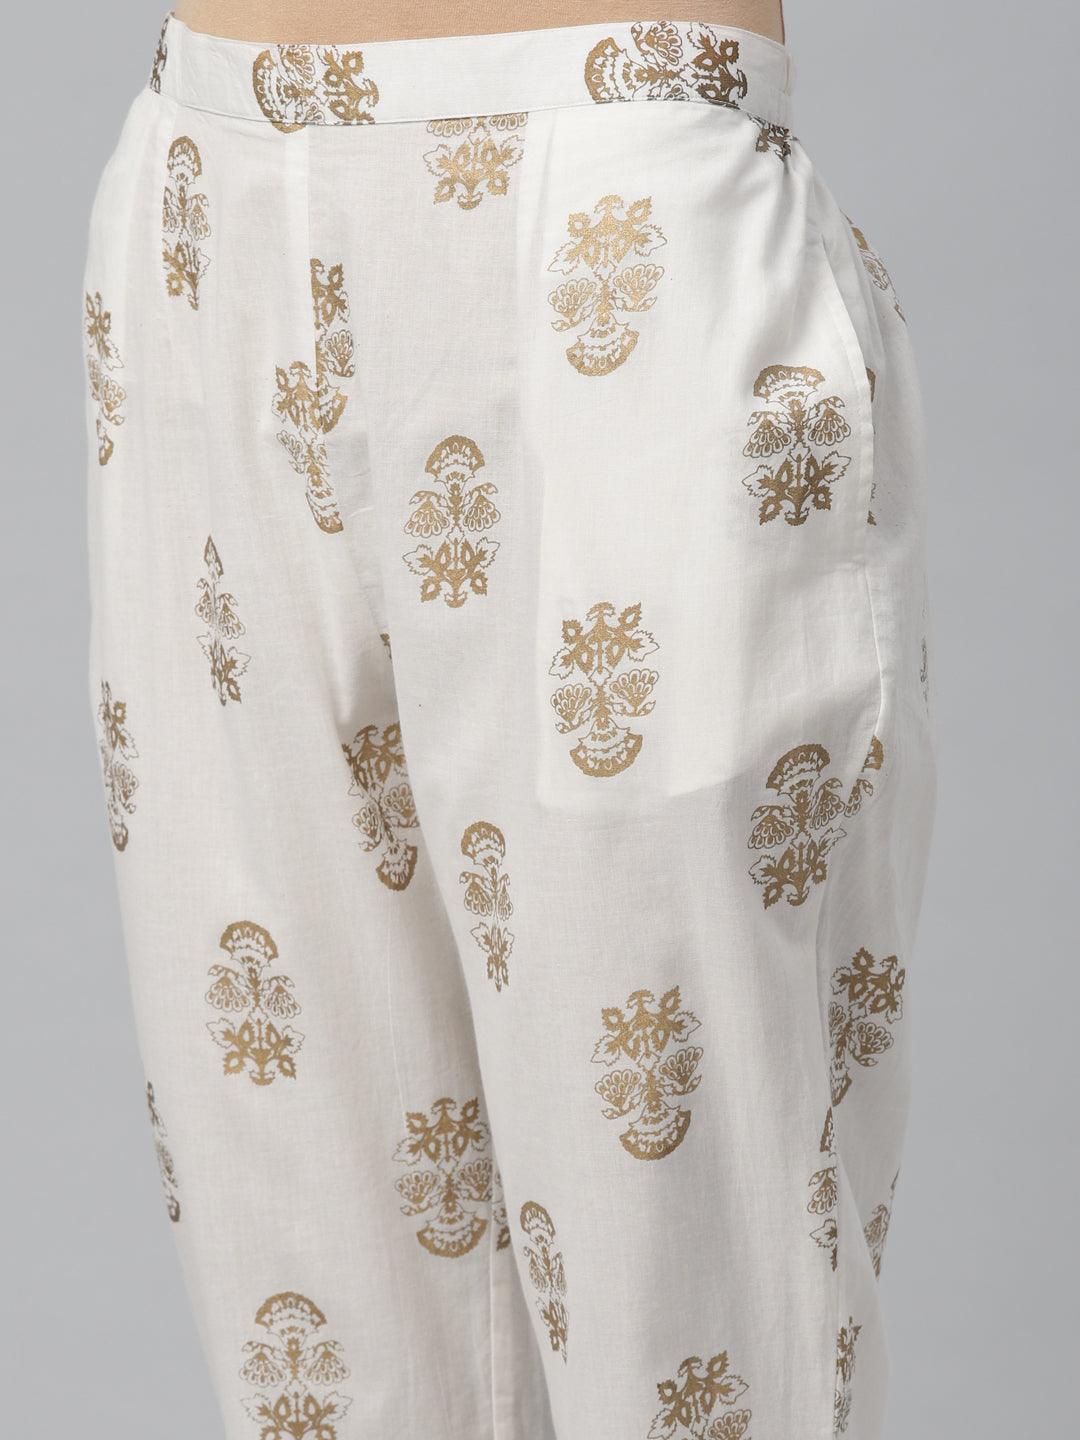 White Printed Cotton Trousers